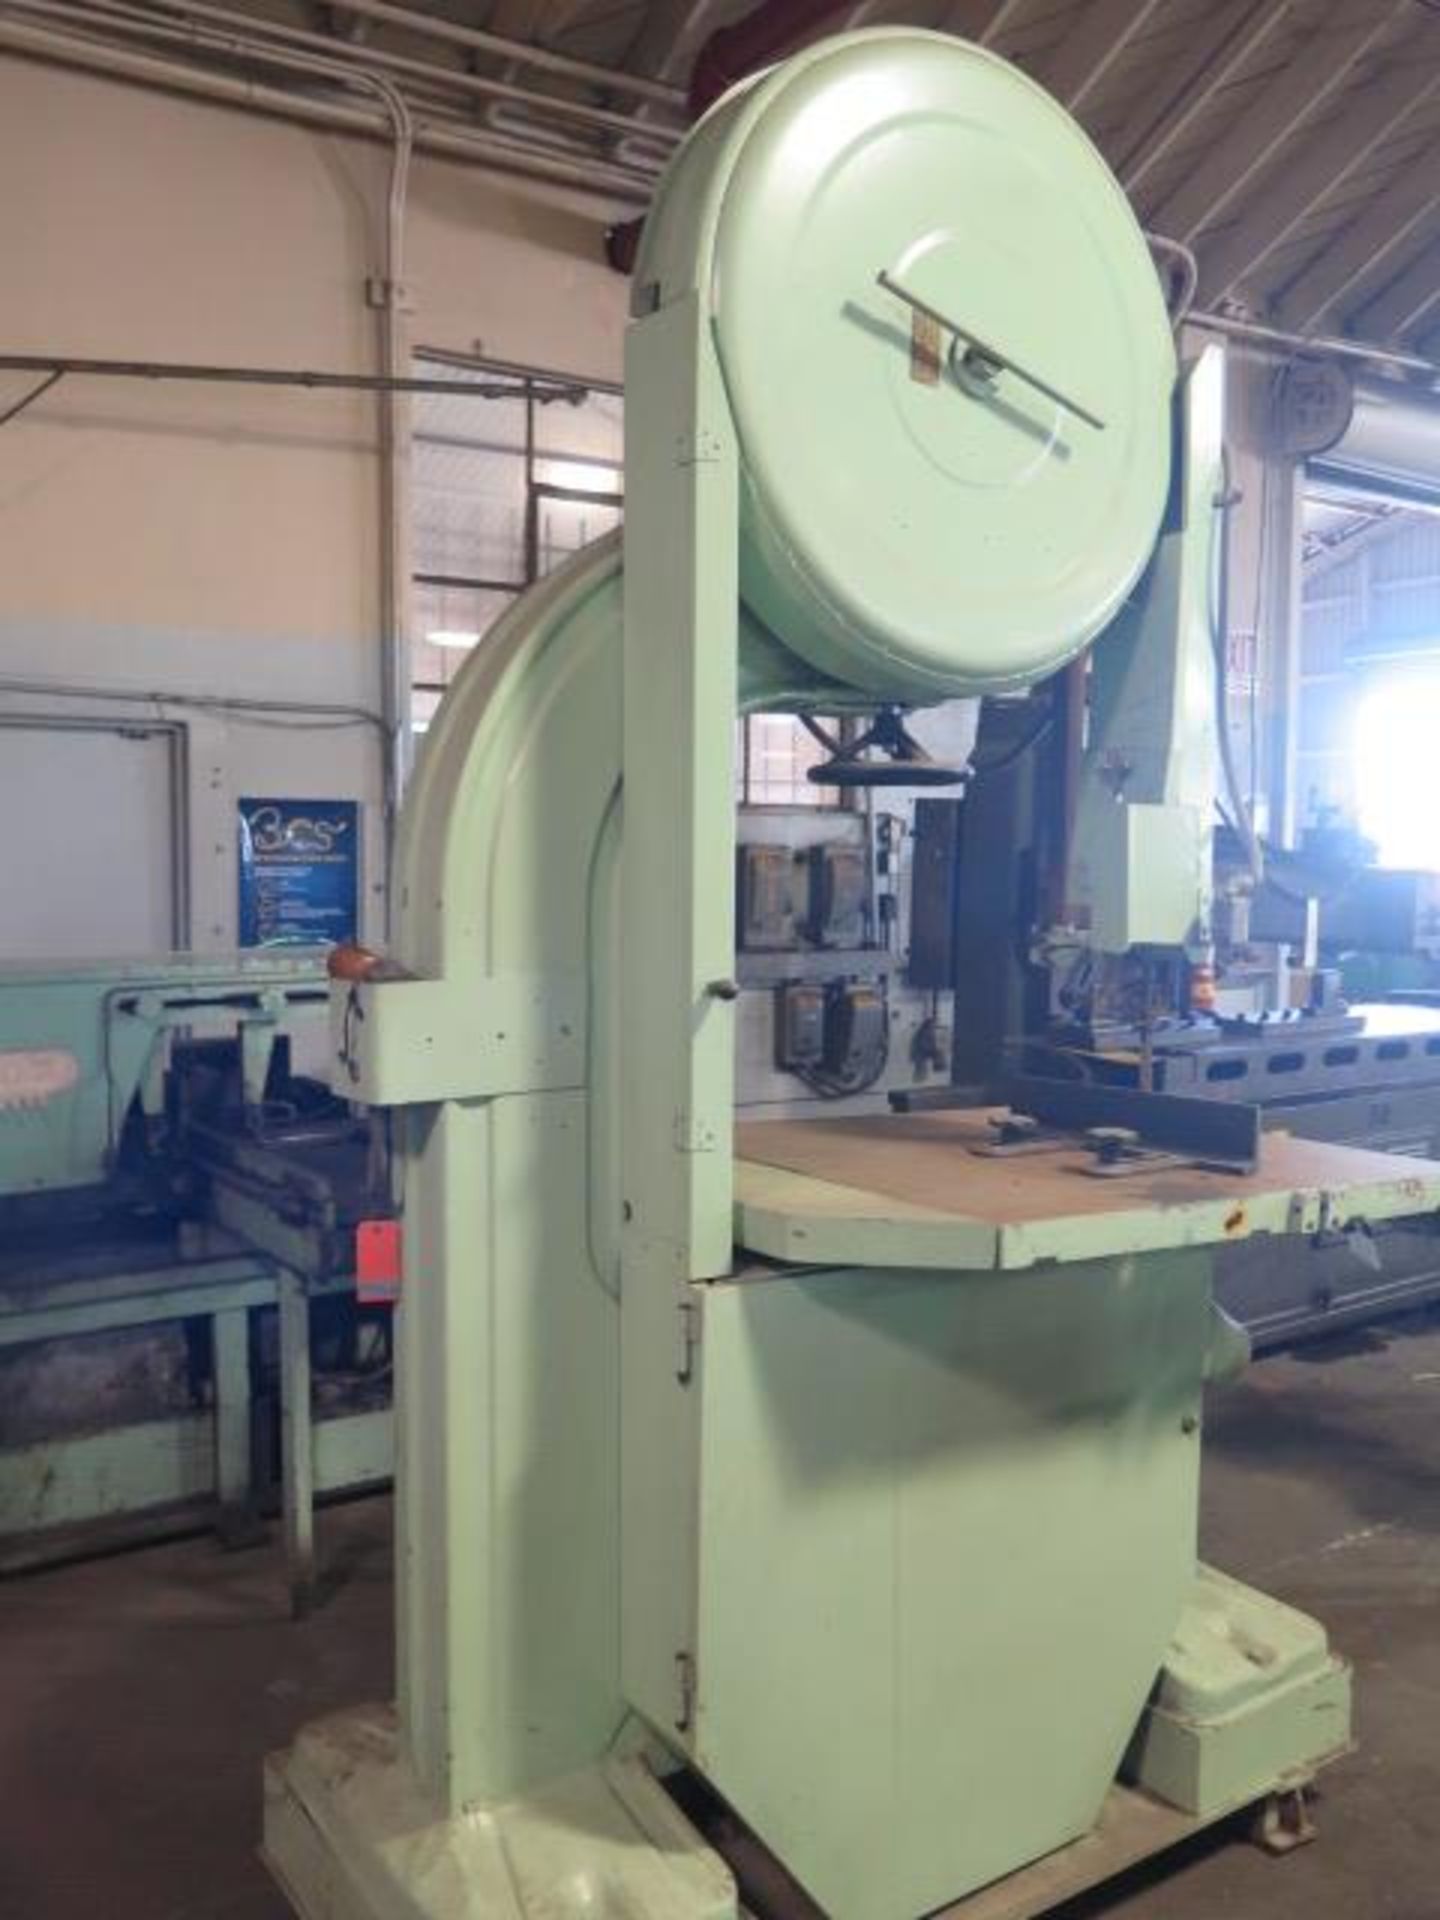 Centauro Brevettata 34" Vertical Band Saw w/ 35" x 42" Table (SOLD AS-IS - NO WARRANTY) - Image 2 of 6